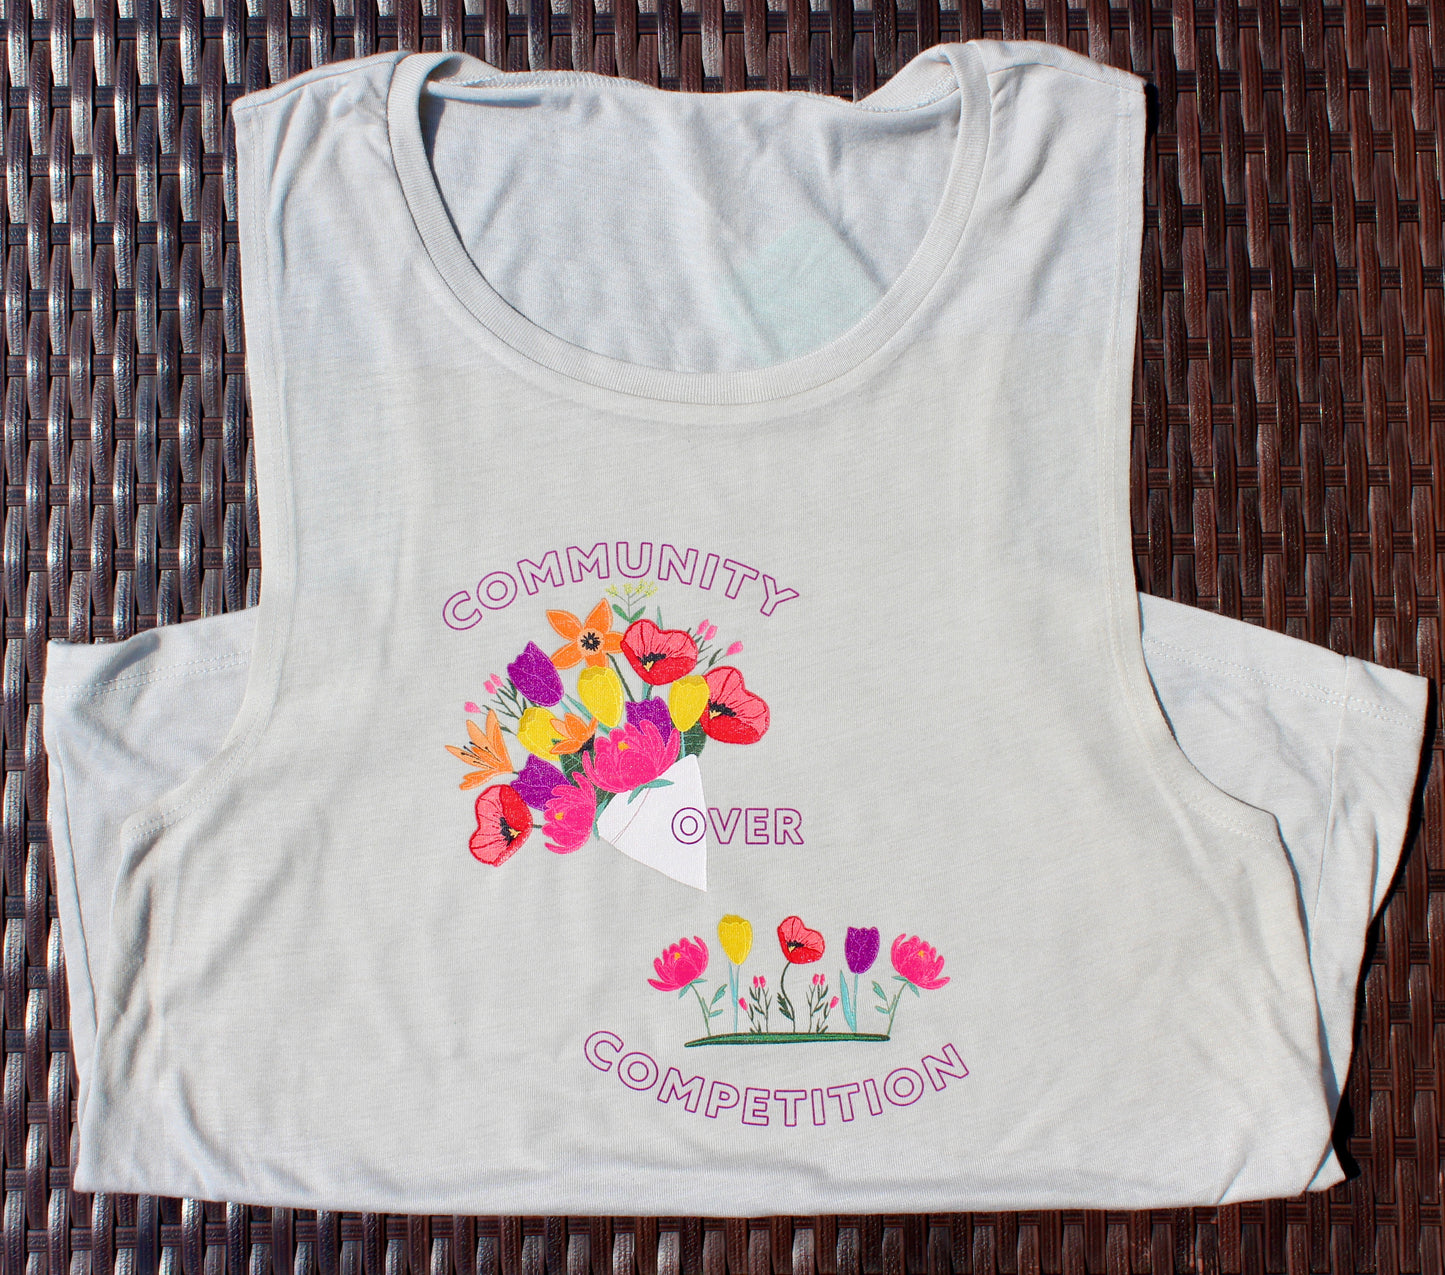 Community Over Competition Tank Top (Women's)